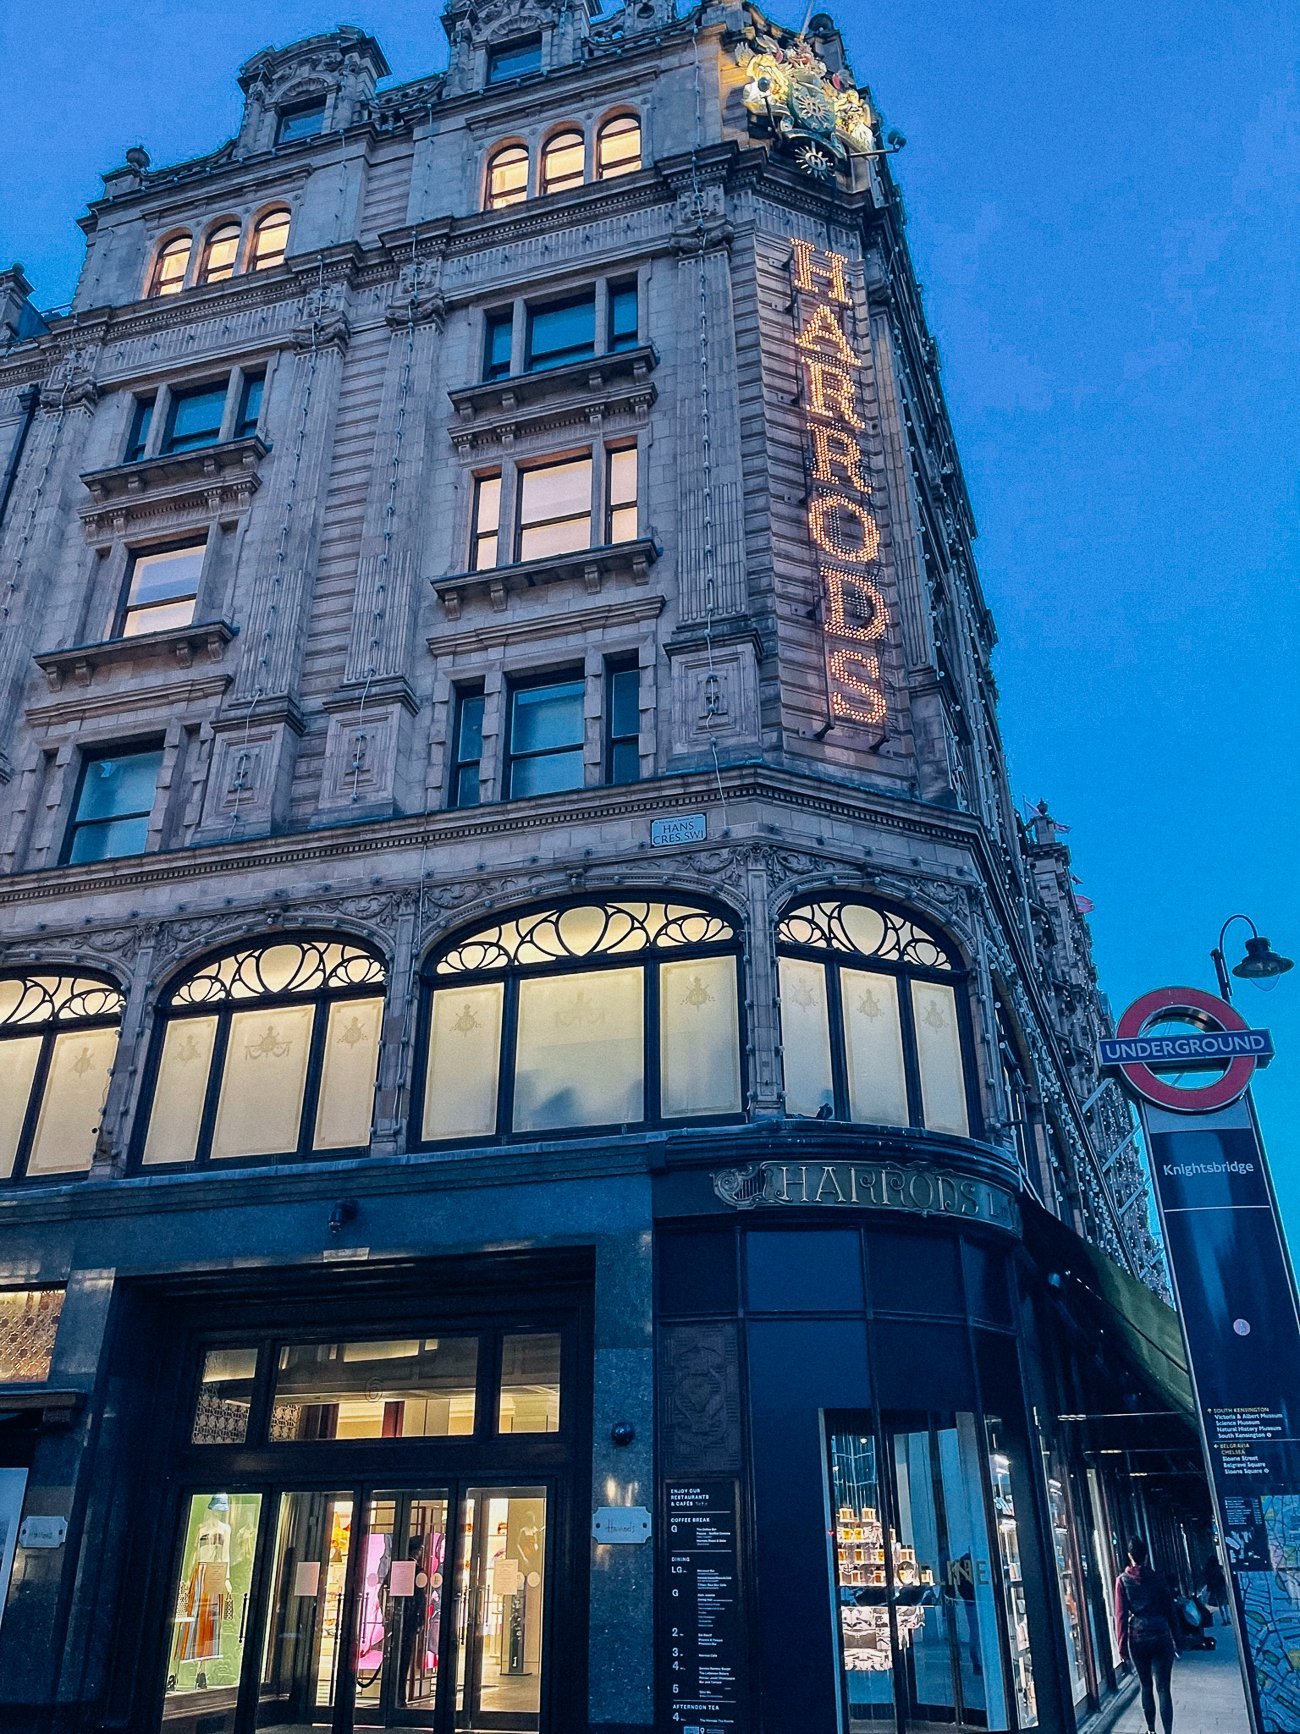 Harrods exterior at night with lit sign